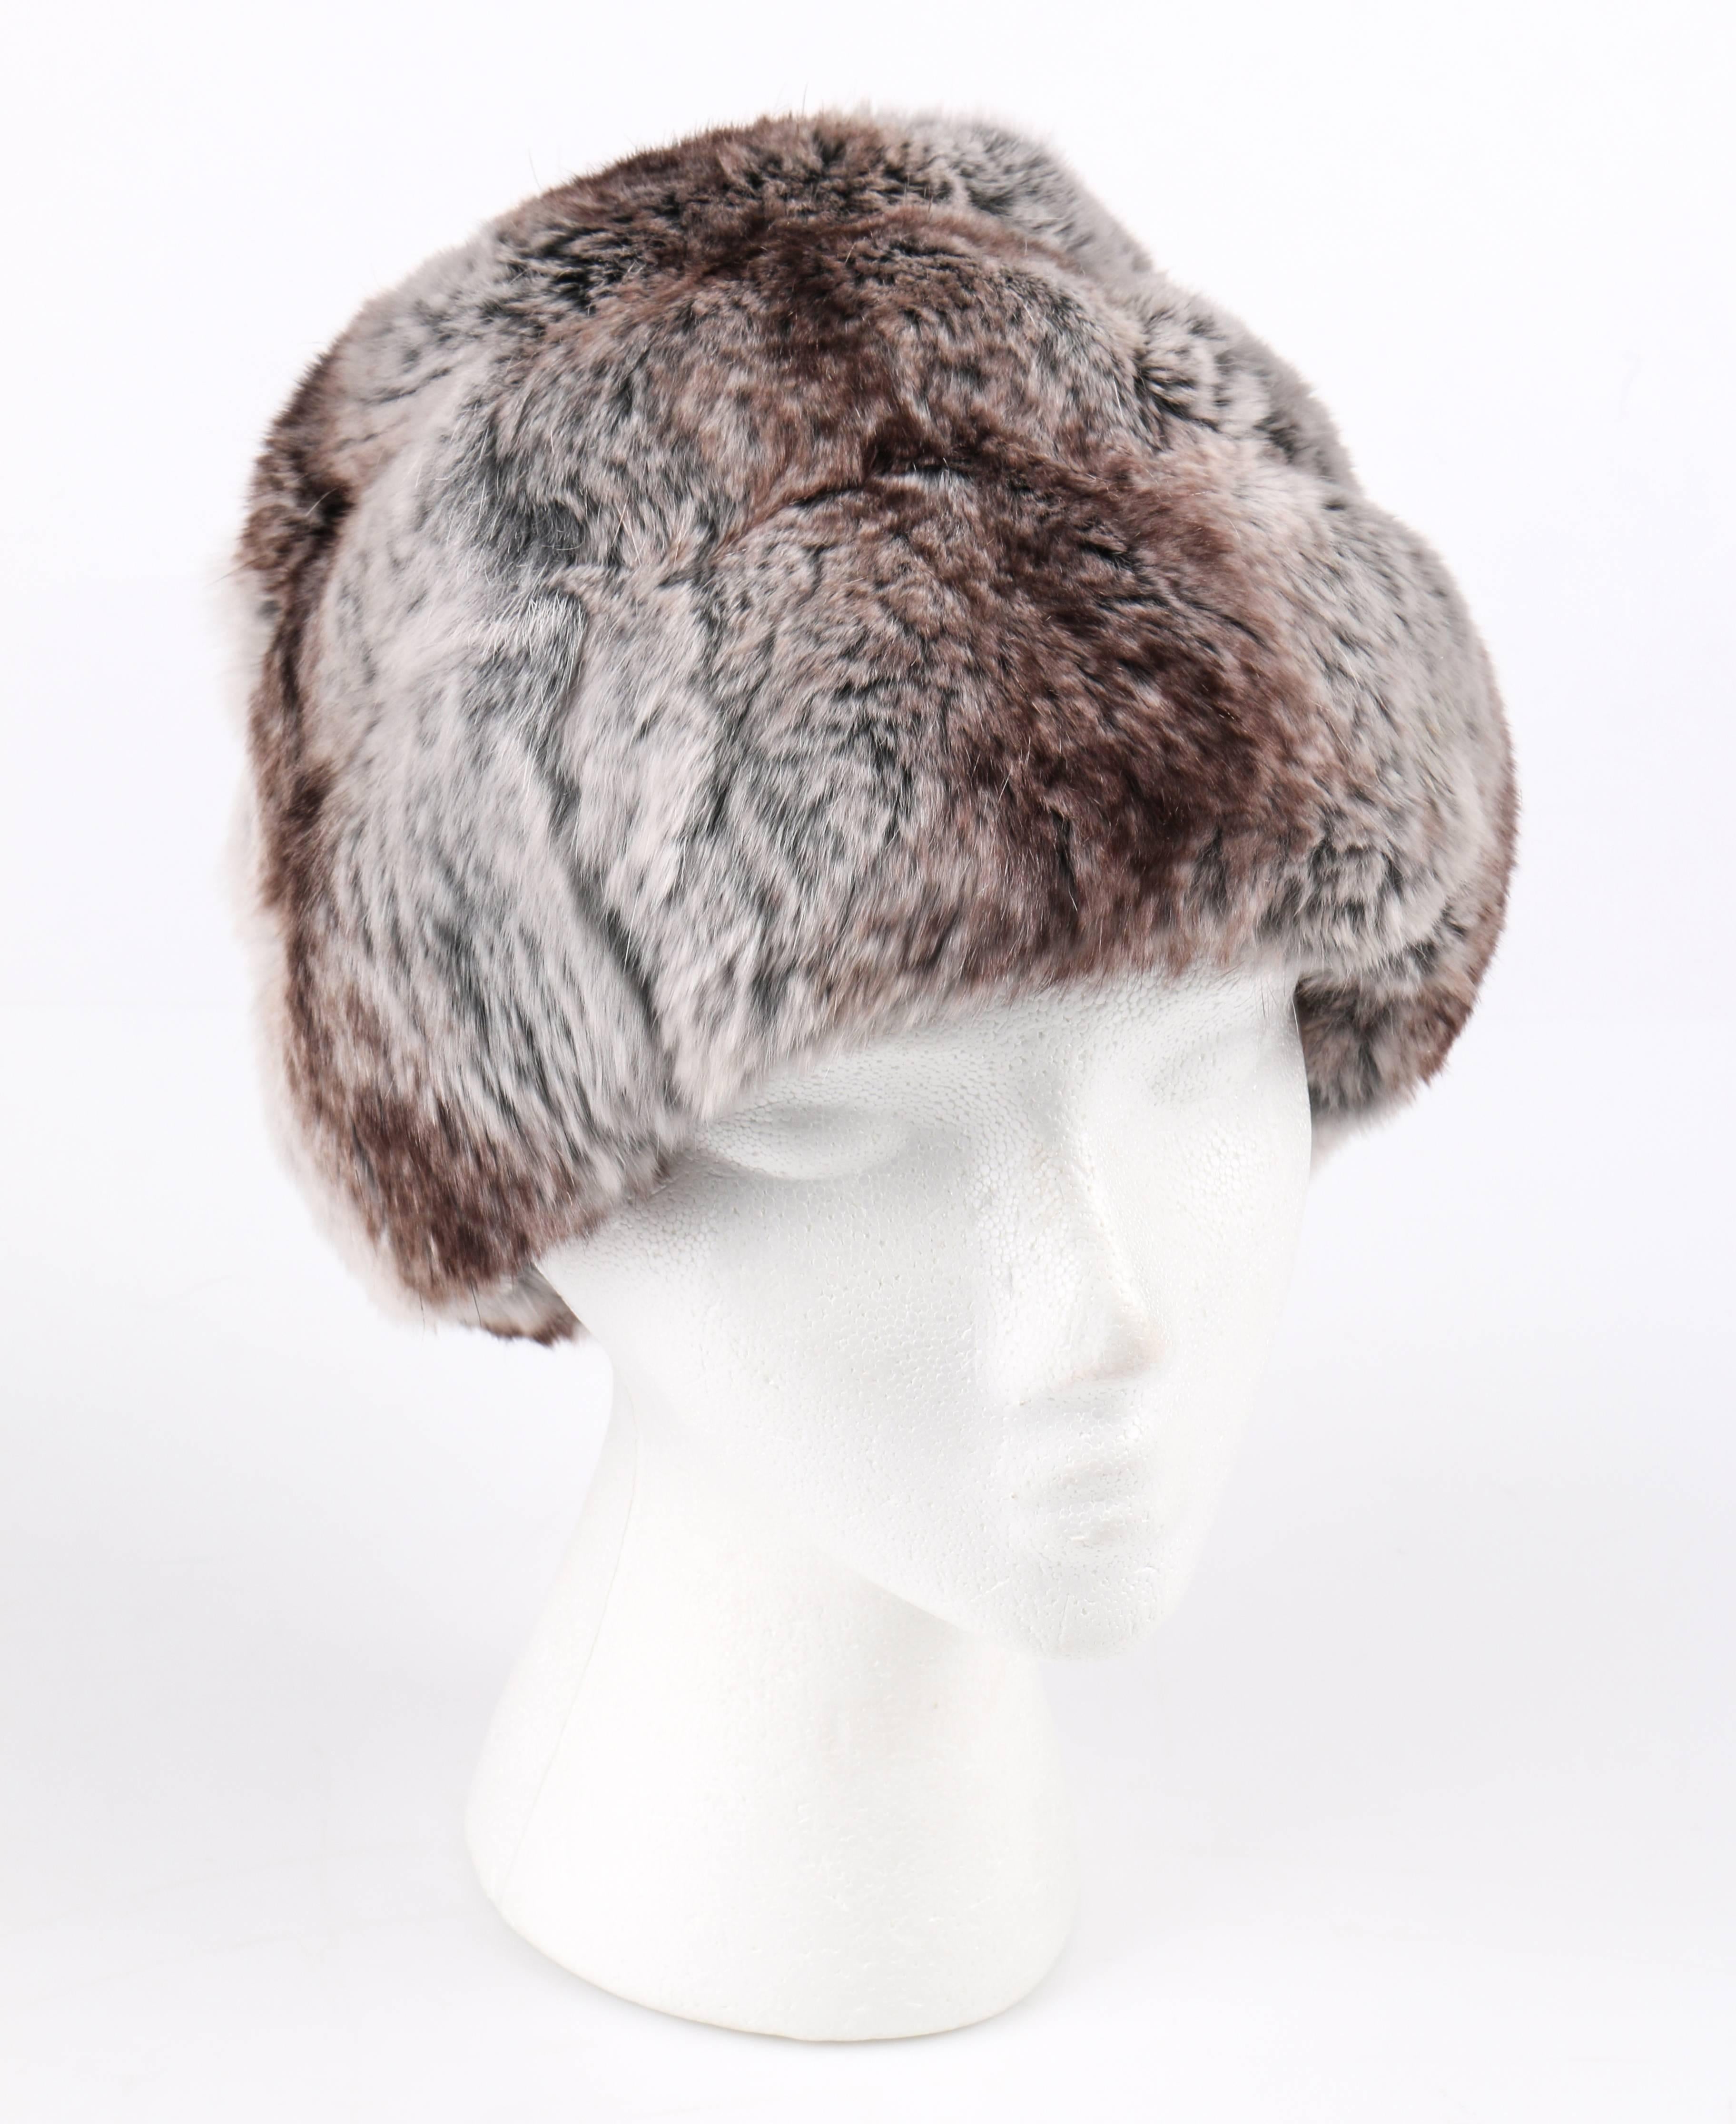 Vintage c.1960's Christian Dior designed by Marc Bohan, natural gray and brown striped chinchilla fur hat. Three tiered cossack body. Black silk faille lining. Black grosgrain ribbon along inside at brim. Unmarked fabric content: Genuine chinchilla